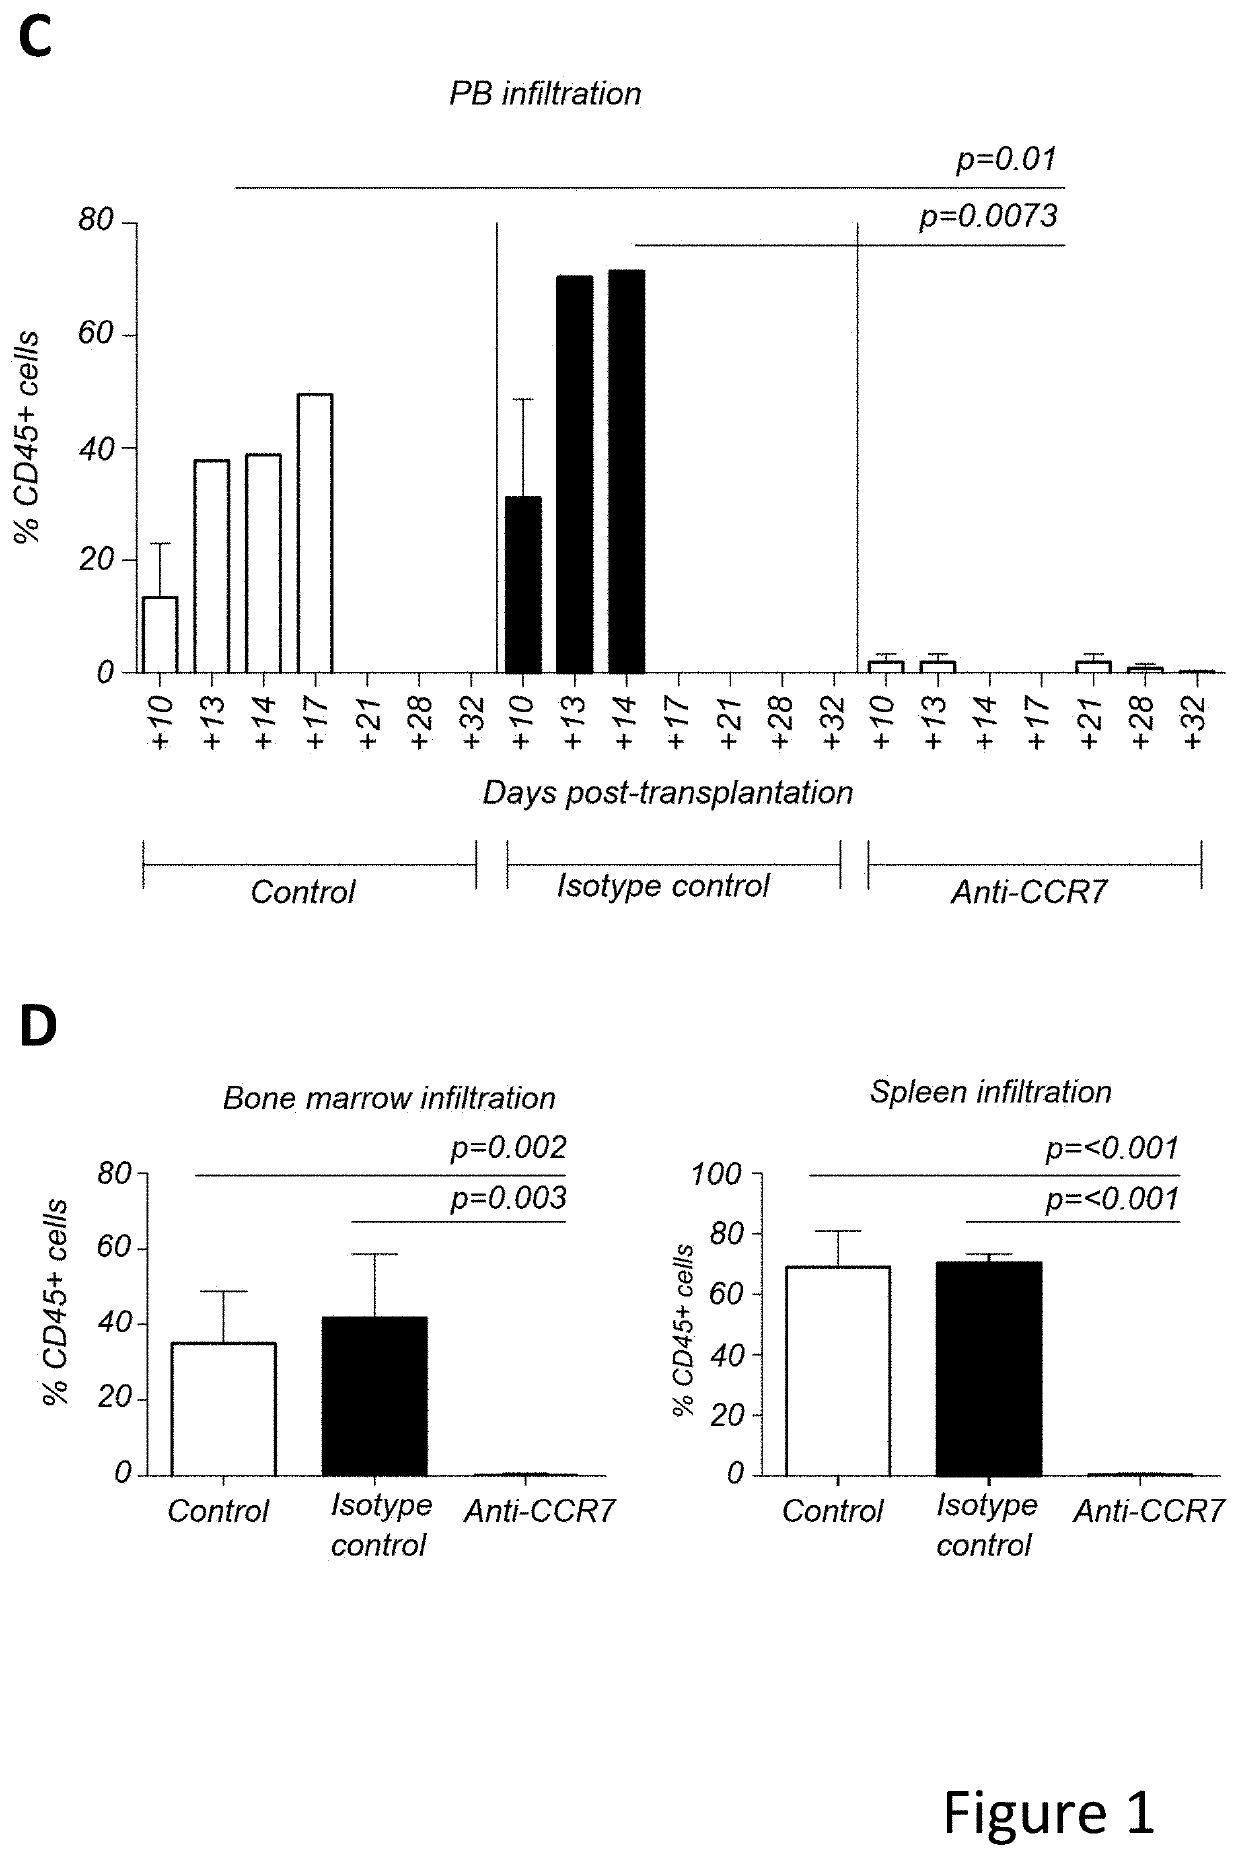 The use of anti-CCR7 mabs for the prevention or treatment of graft-versus-host disease (GvHD)